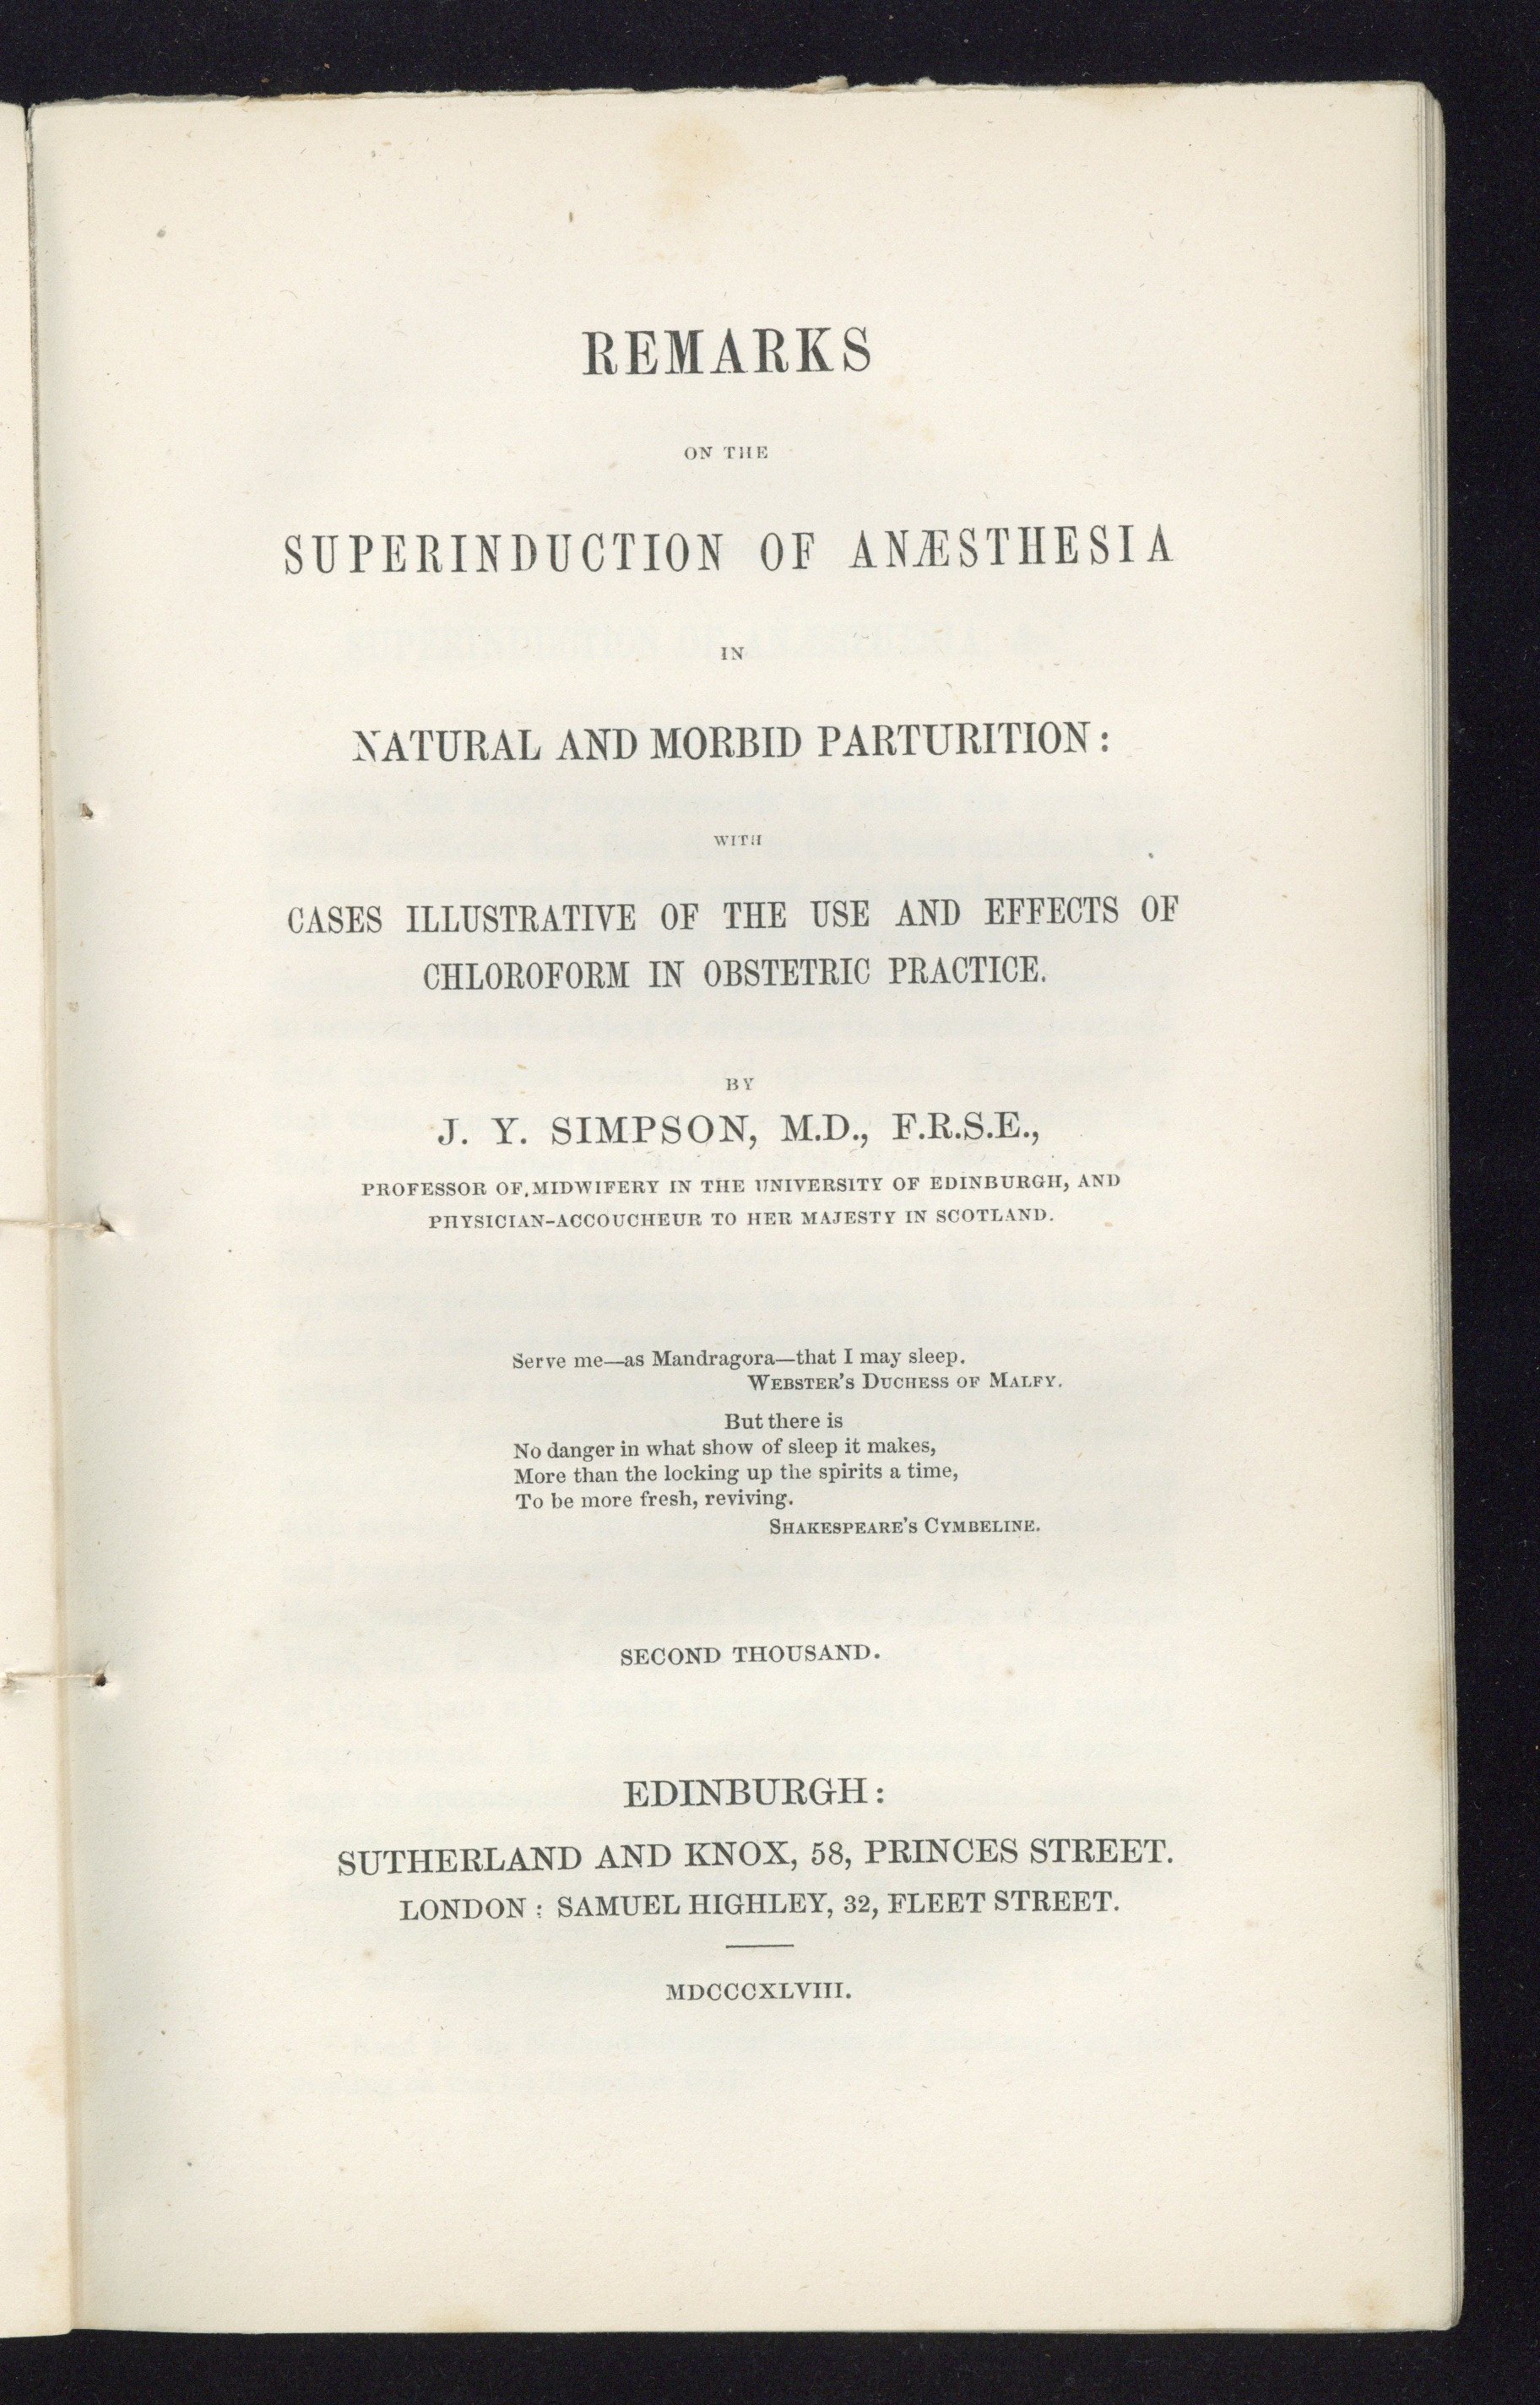 <p>Title Page of James Young Simpson’s ‘Remarks on the Superinduction of Anaesthesia in Natural and Morbid Parturiton: with Cases Illustrative of the use and effects of Chloroform in Obstetric Practice’, wherein Simpson discusses how Chloroform can be used in childbirth.</p>
